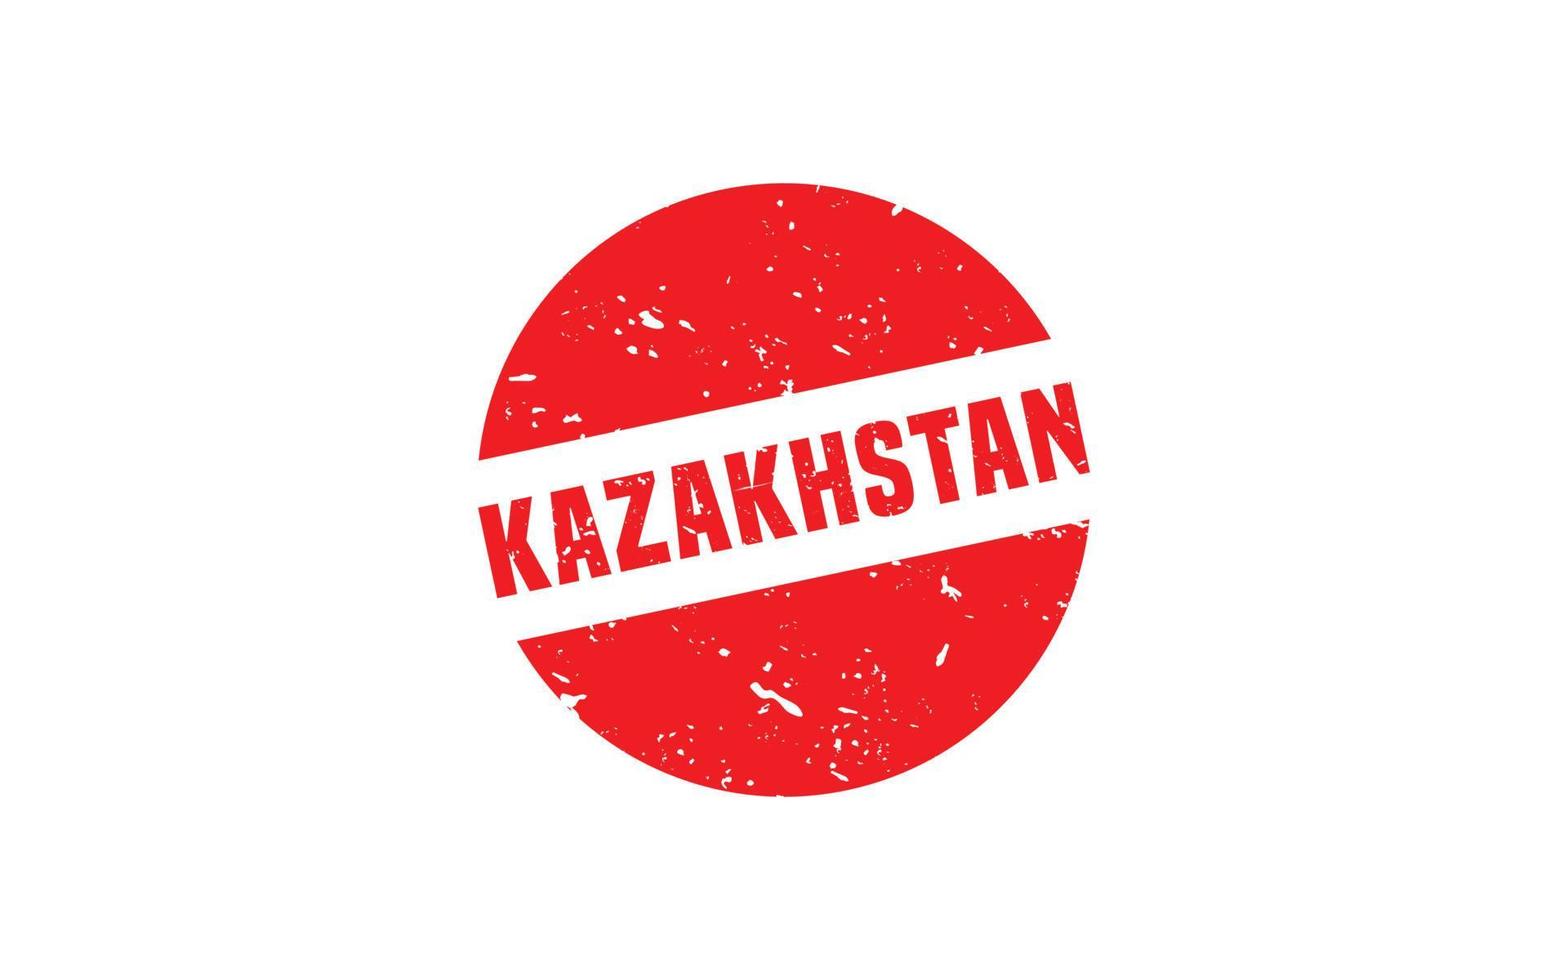 KAZAKHSTAN stamp rubber with grunge style on white background vector